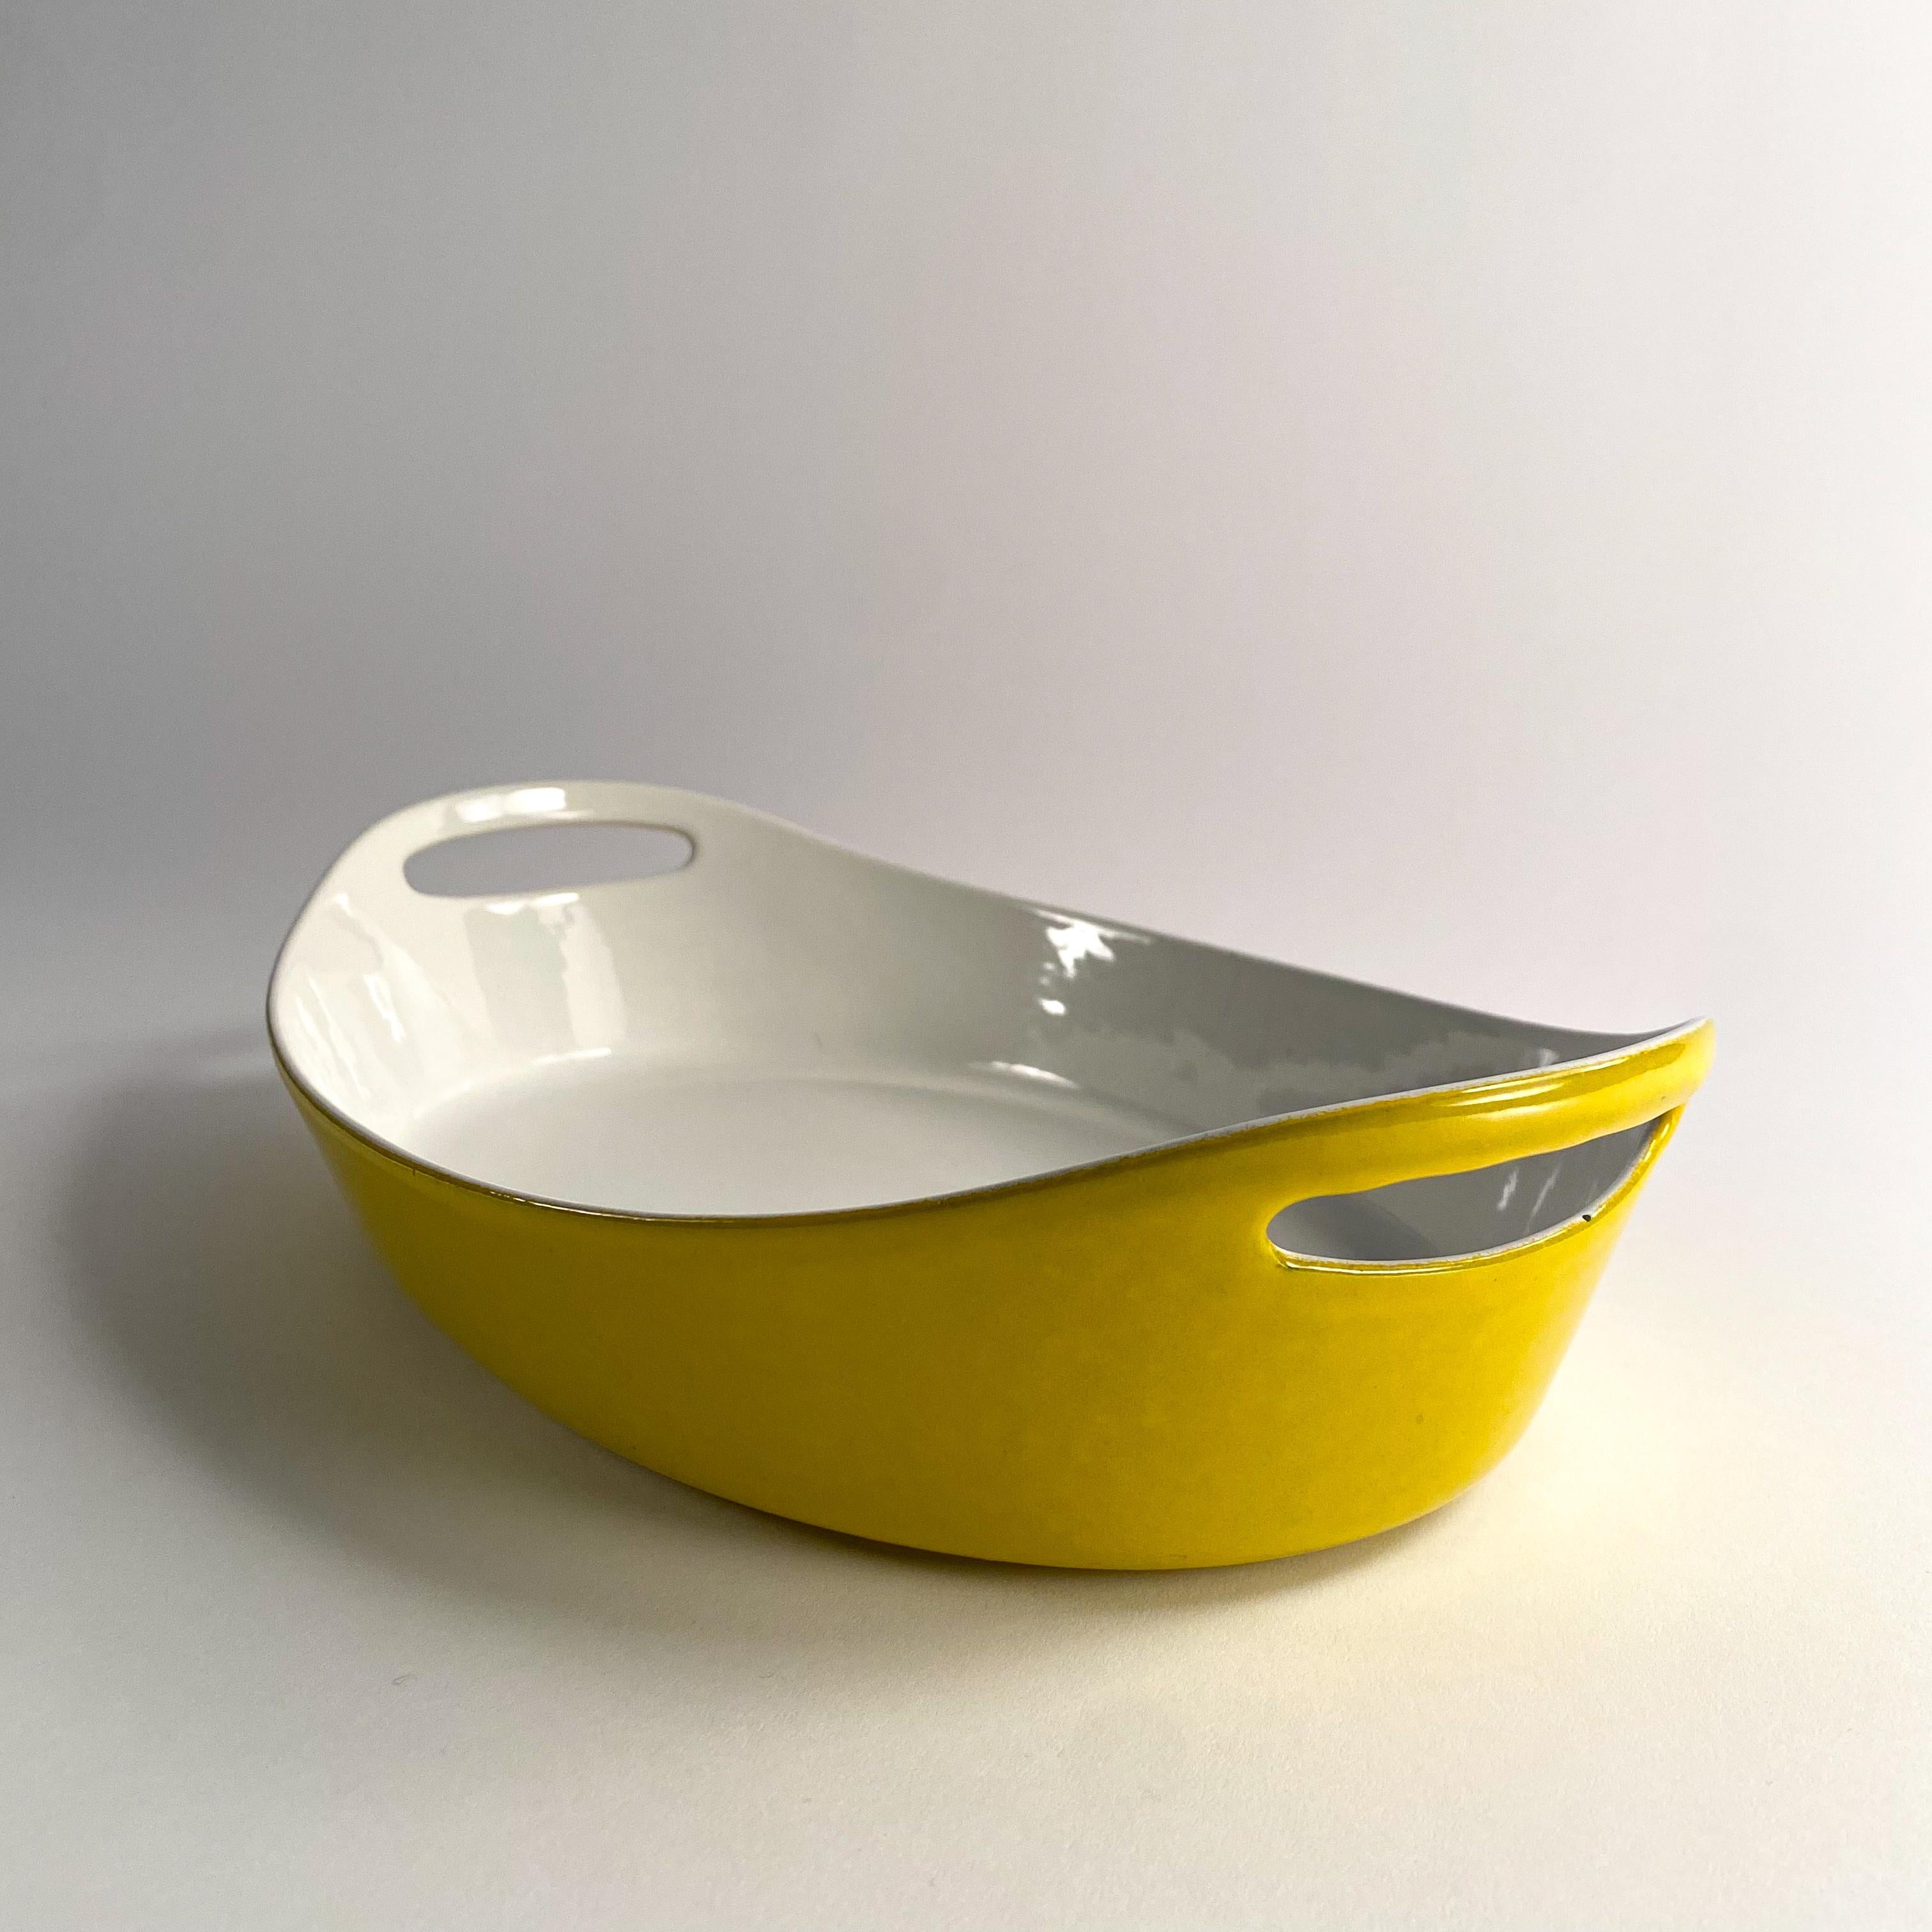 vintage yellow enameled castiron casserole dish by Michael Lax for Copco In Good Condition For Sale In Philadelphia, PA